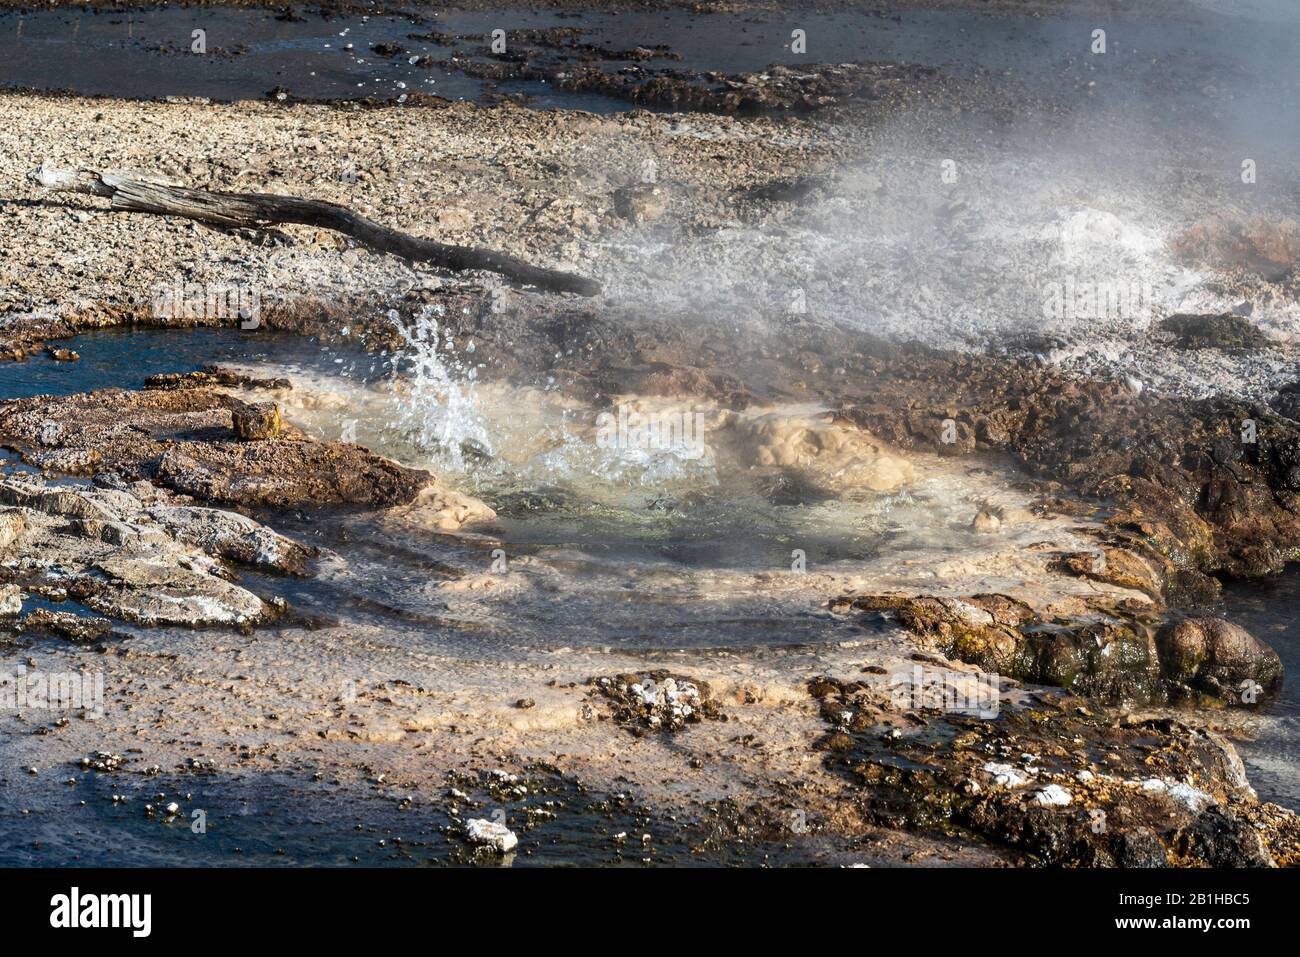 Field with bubbling hot springs and steam. Stock Photo